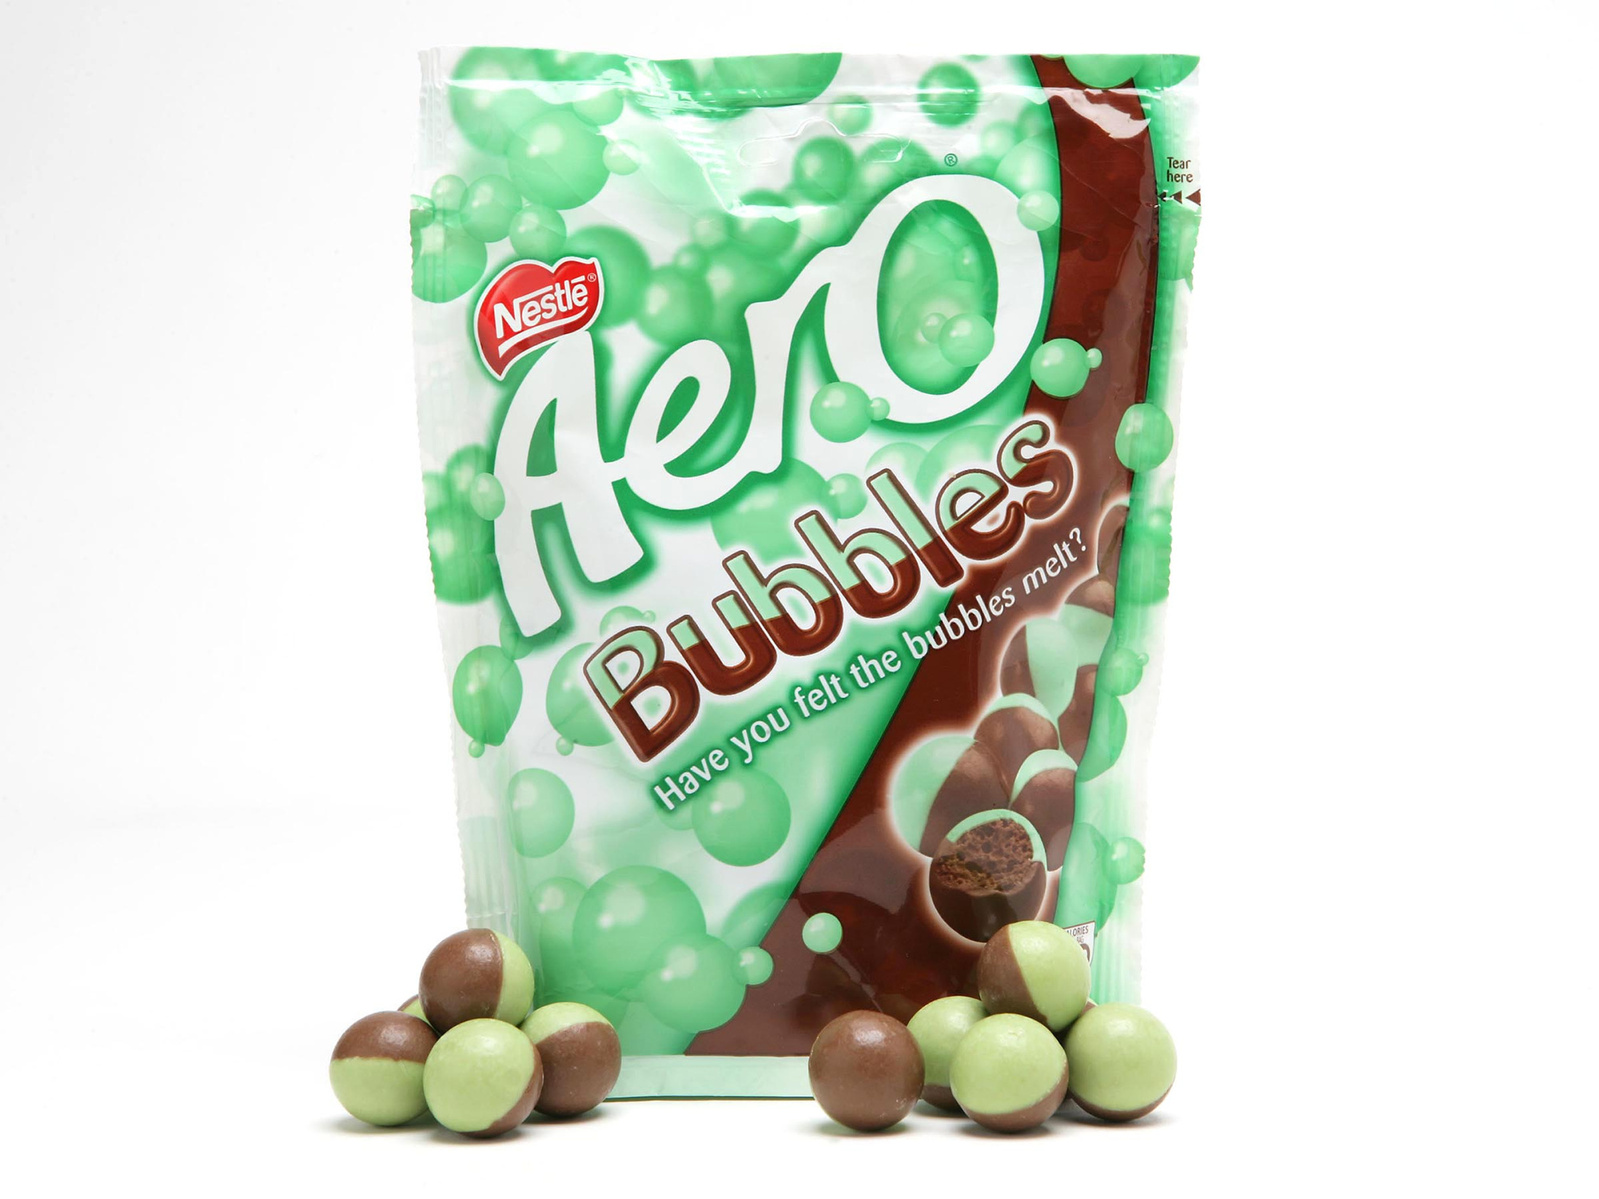 Aero product cut out packshot eCommerce product photographer dublin www.1image.ie